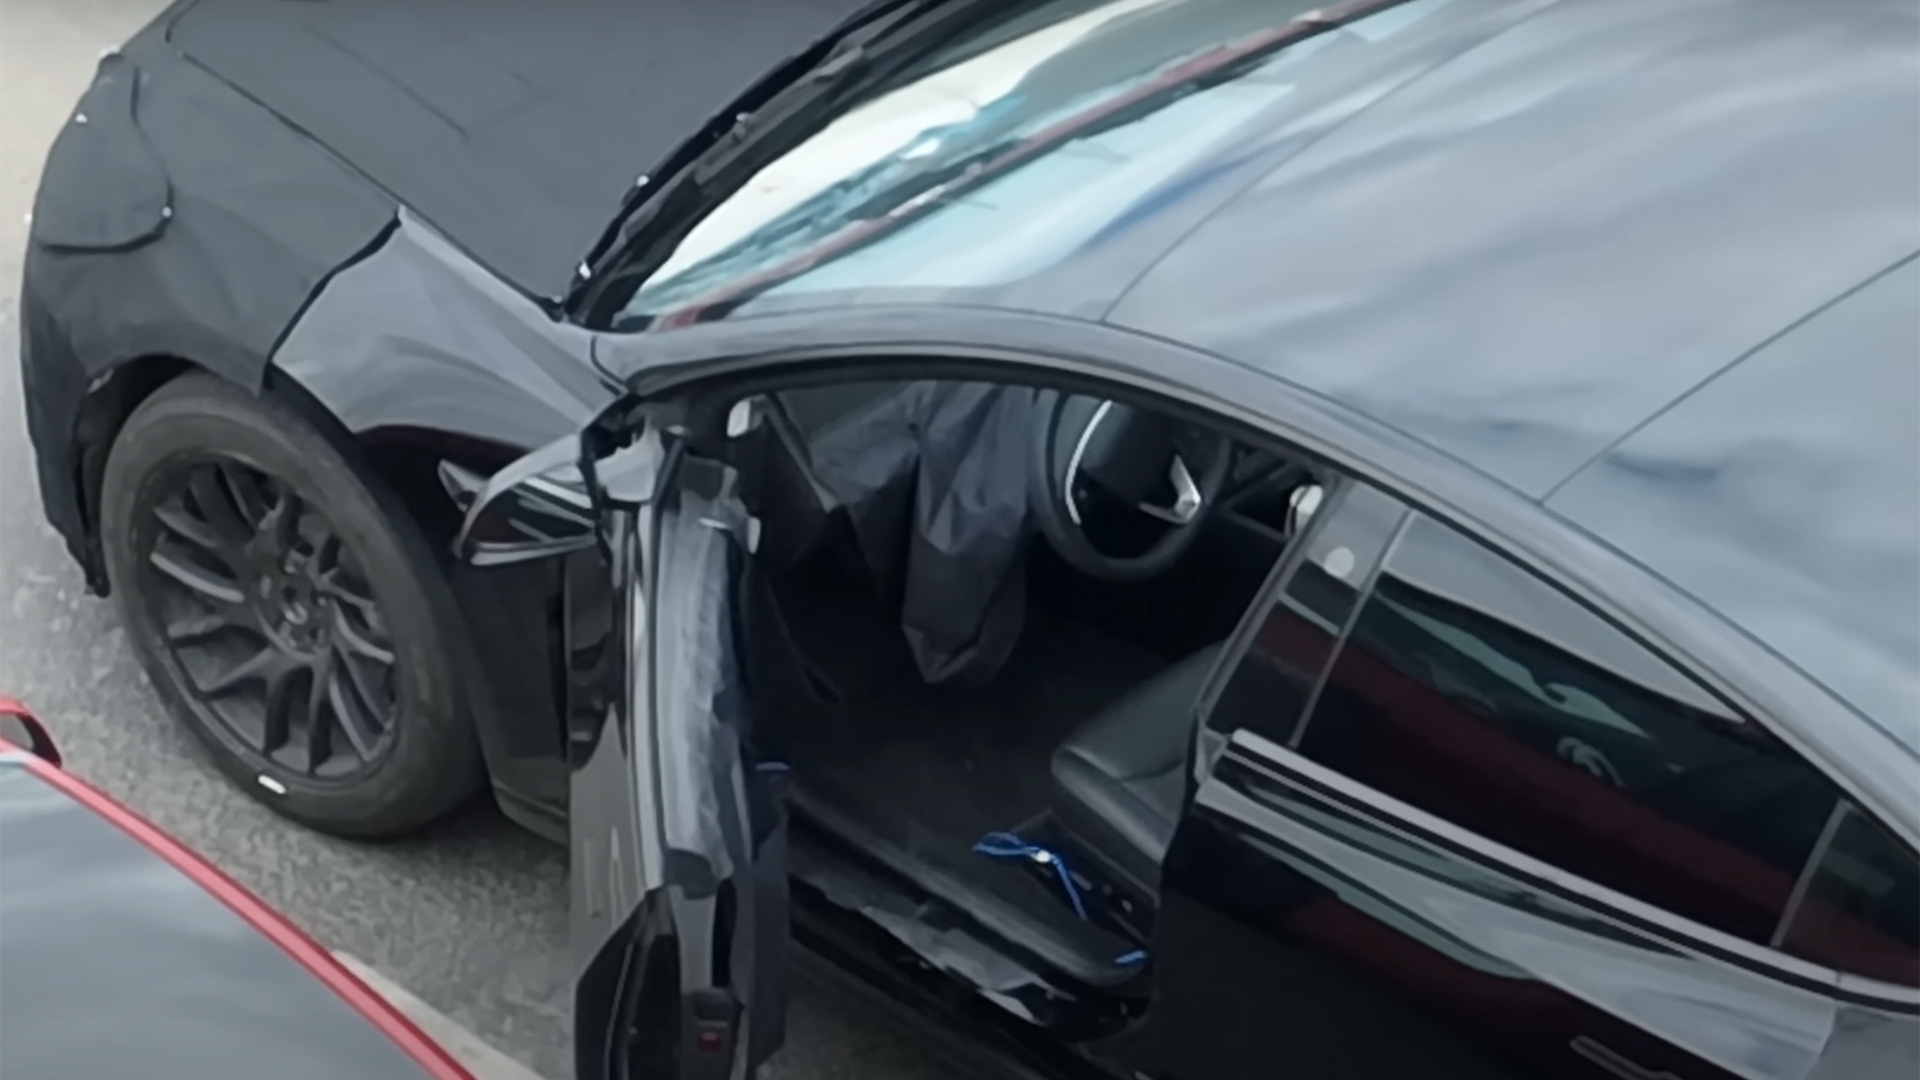 Here's How You Select Gears In The Tesla Model 3 Highland If The